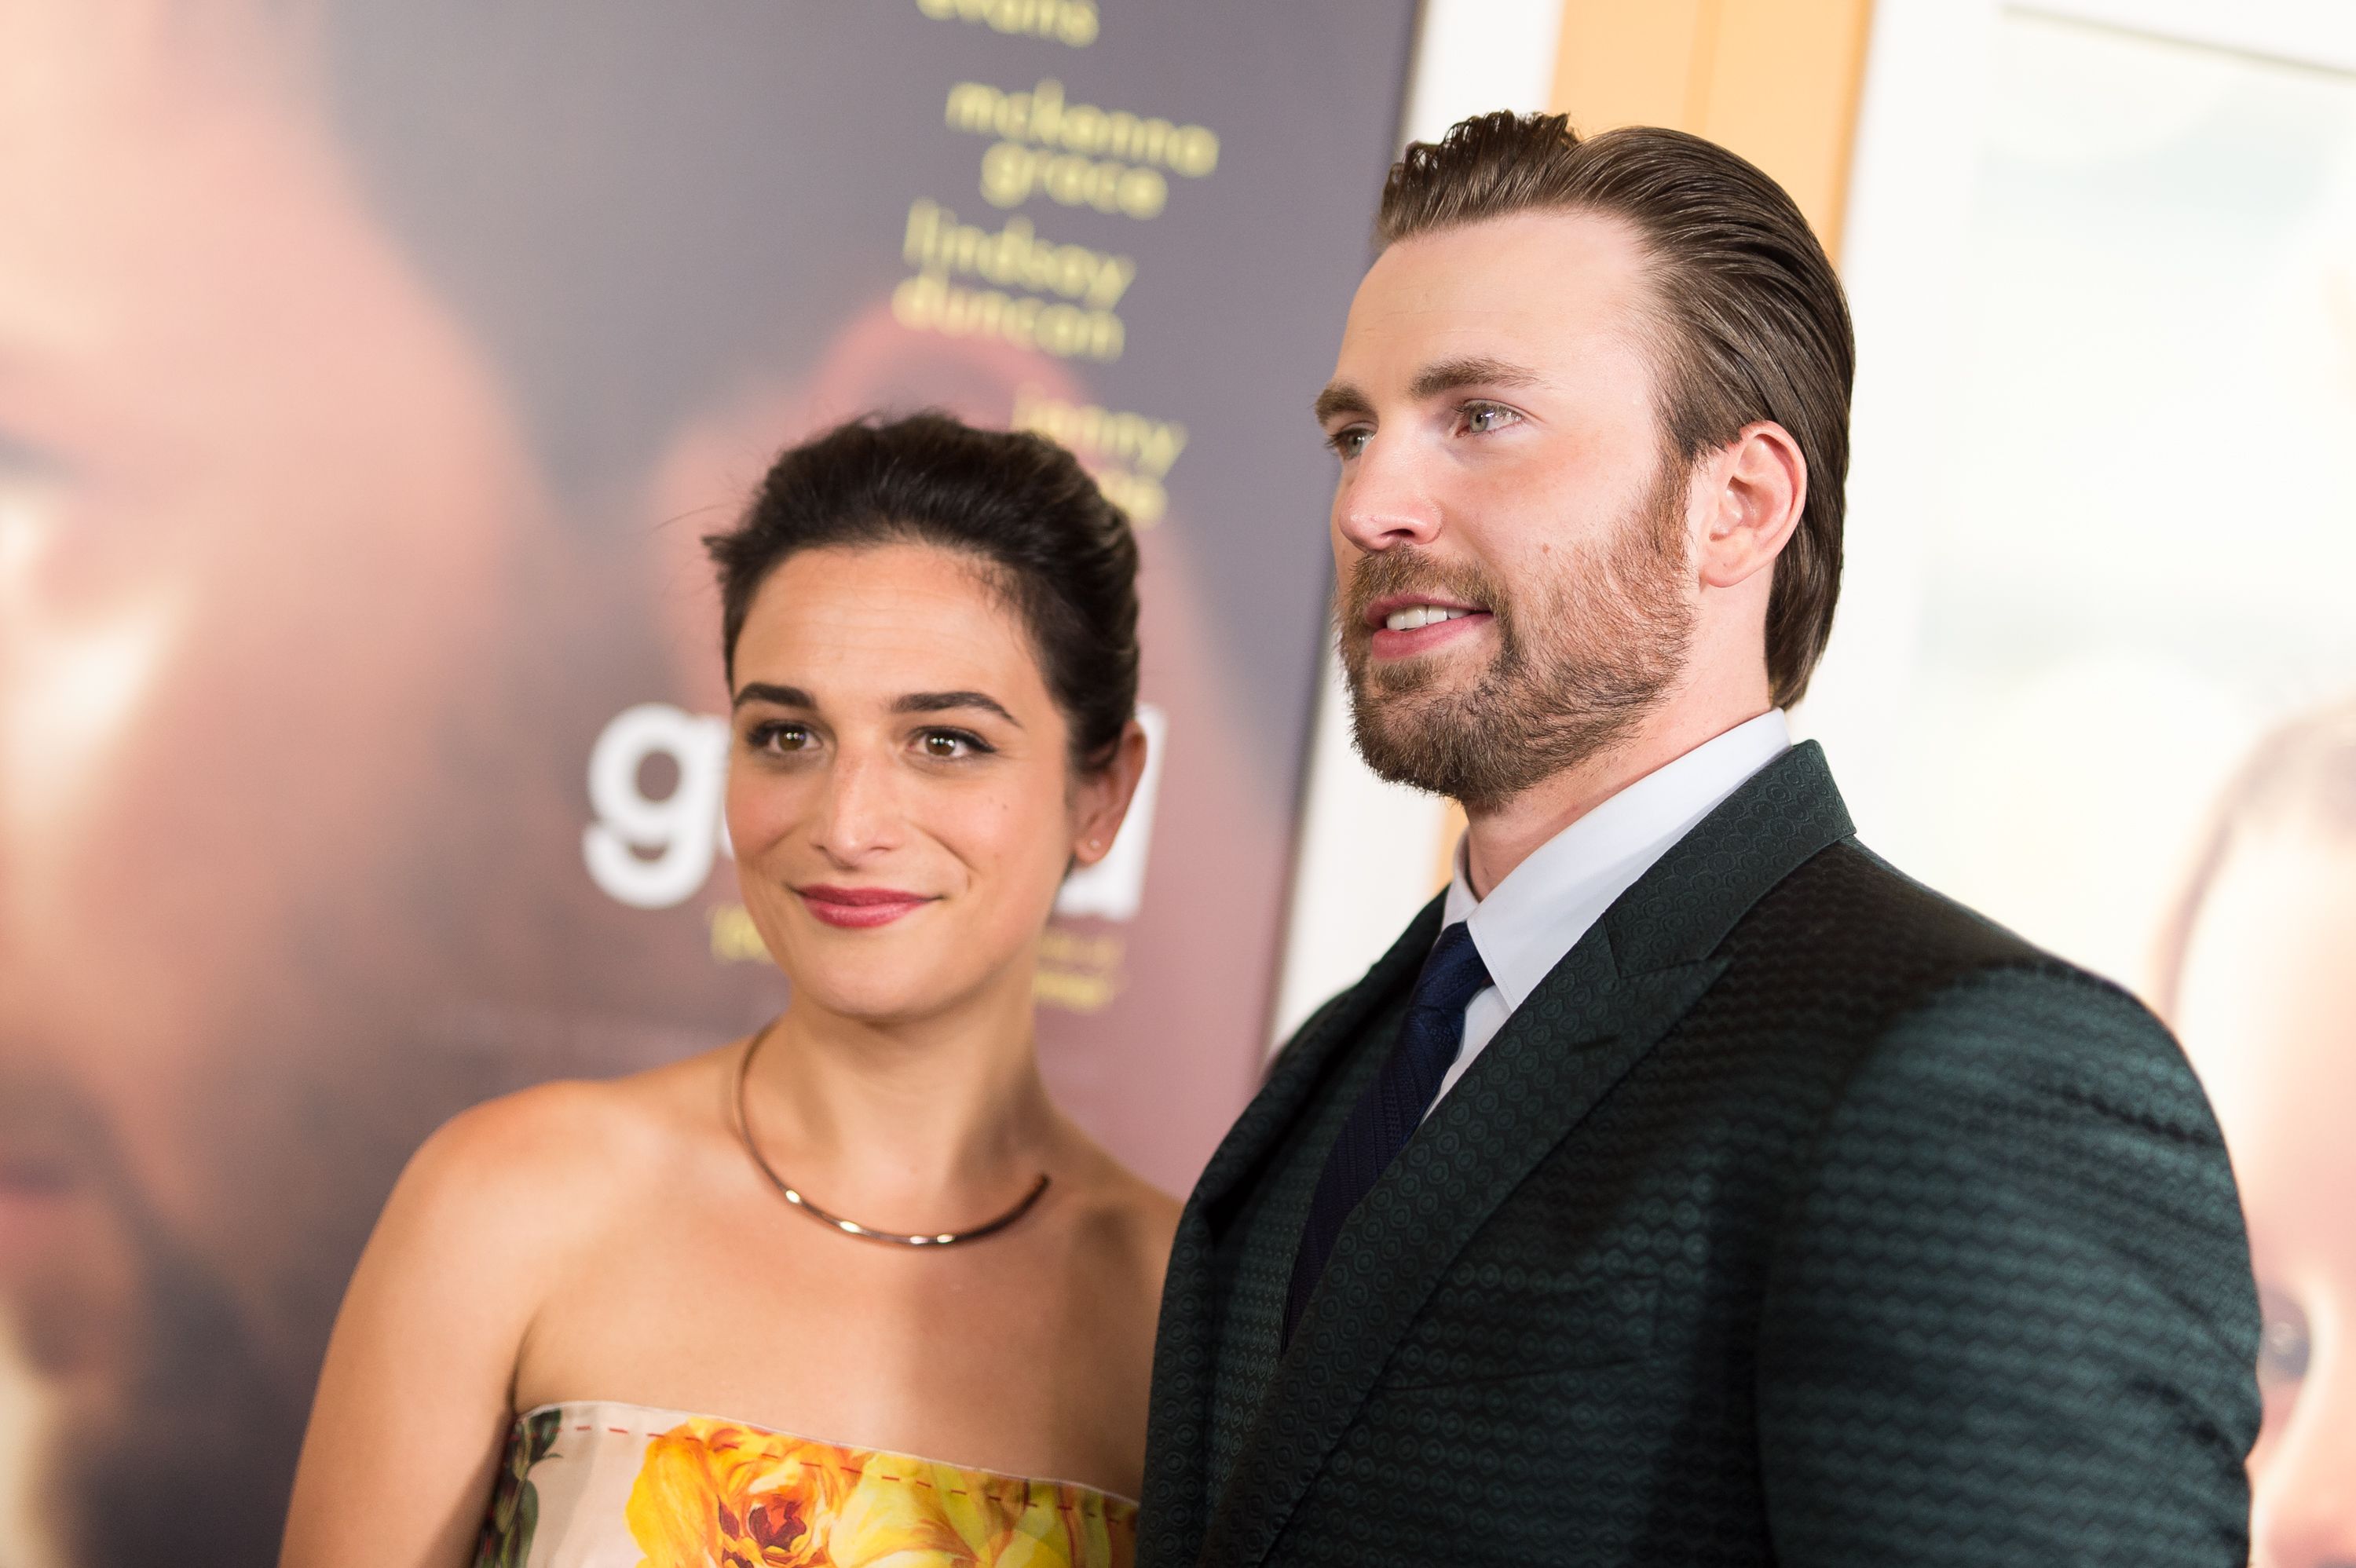 Jenny Slate and Chris Evans at the premiere of 'Gifted' in 2017 in Los Angeles, California | Source: Getty Images